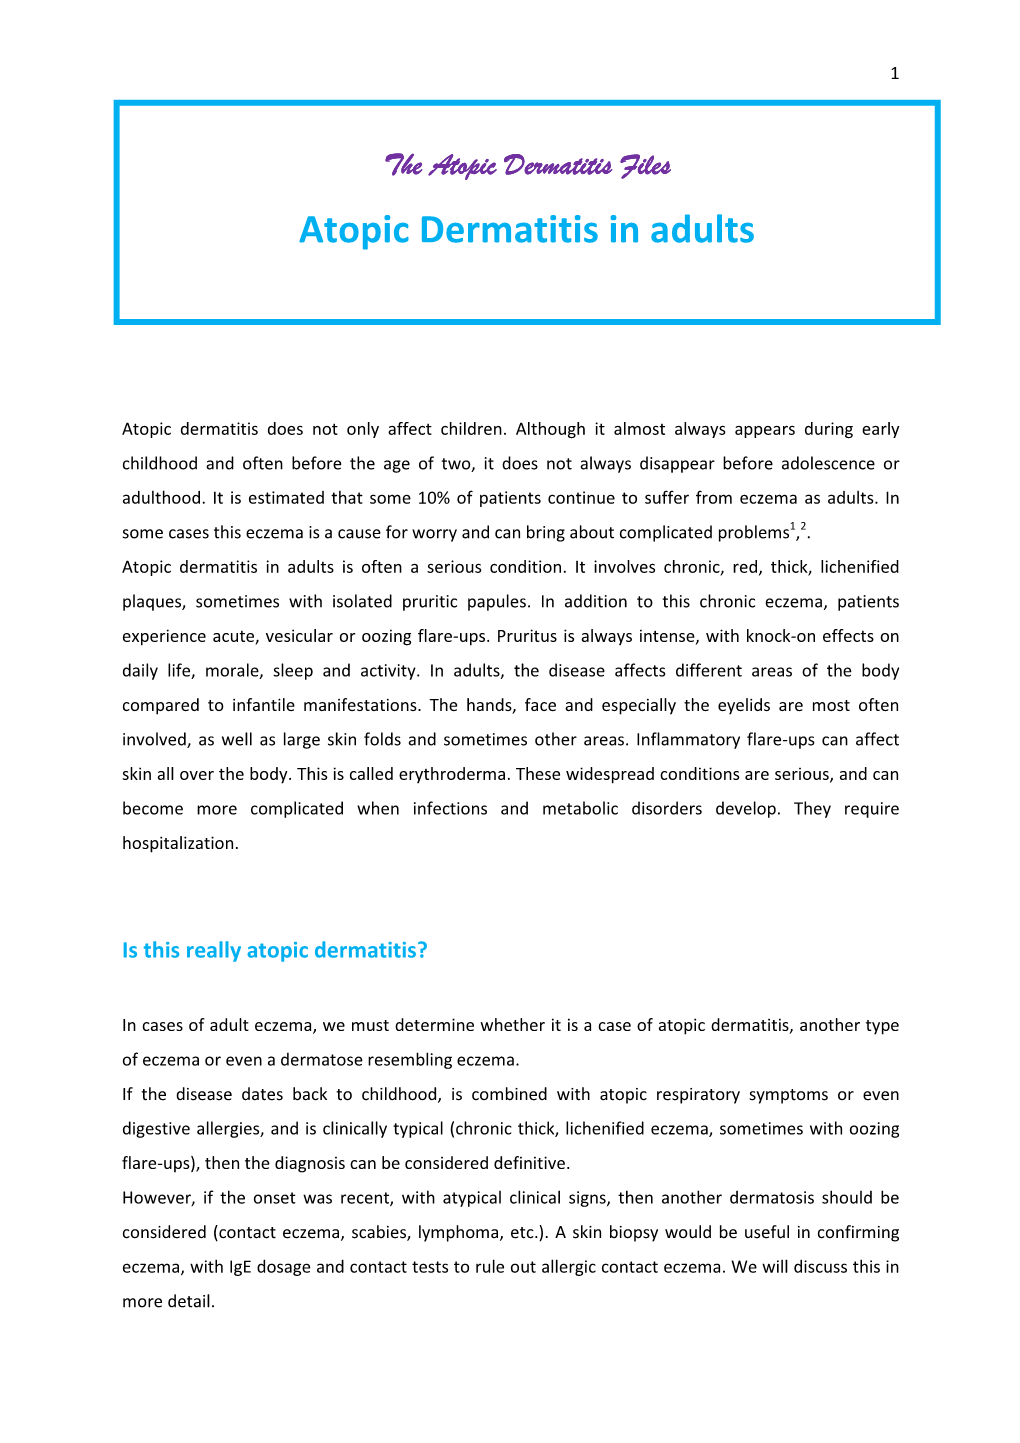 Atopic Dermatitis in Adults